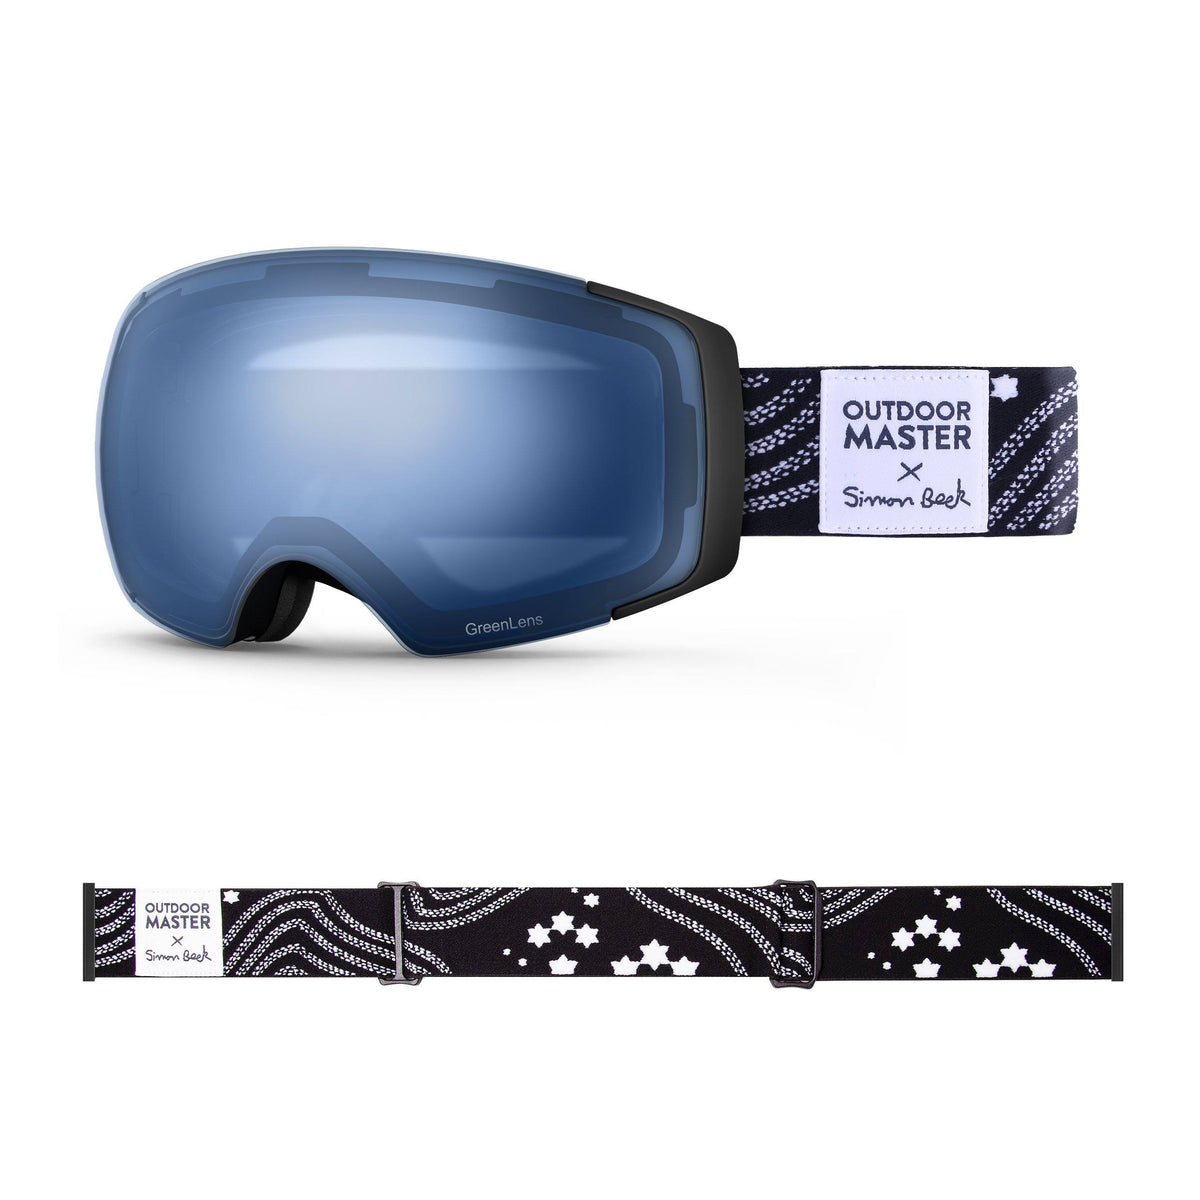 OutdoorMaster x Simon Beck Ski Goggles Pro Series - Snowshoeing Art Limited Edition OutdoorMaster GreenLens VLT 60% TAC Blue Polarized Star Road-Black